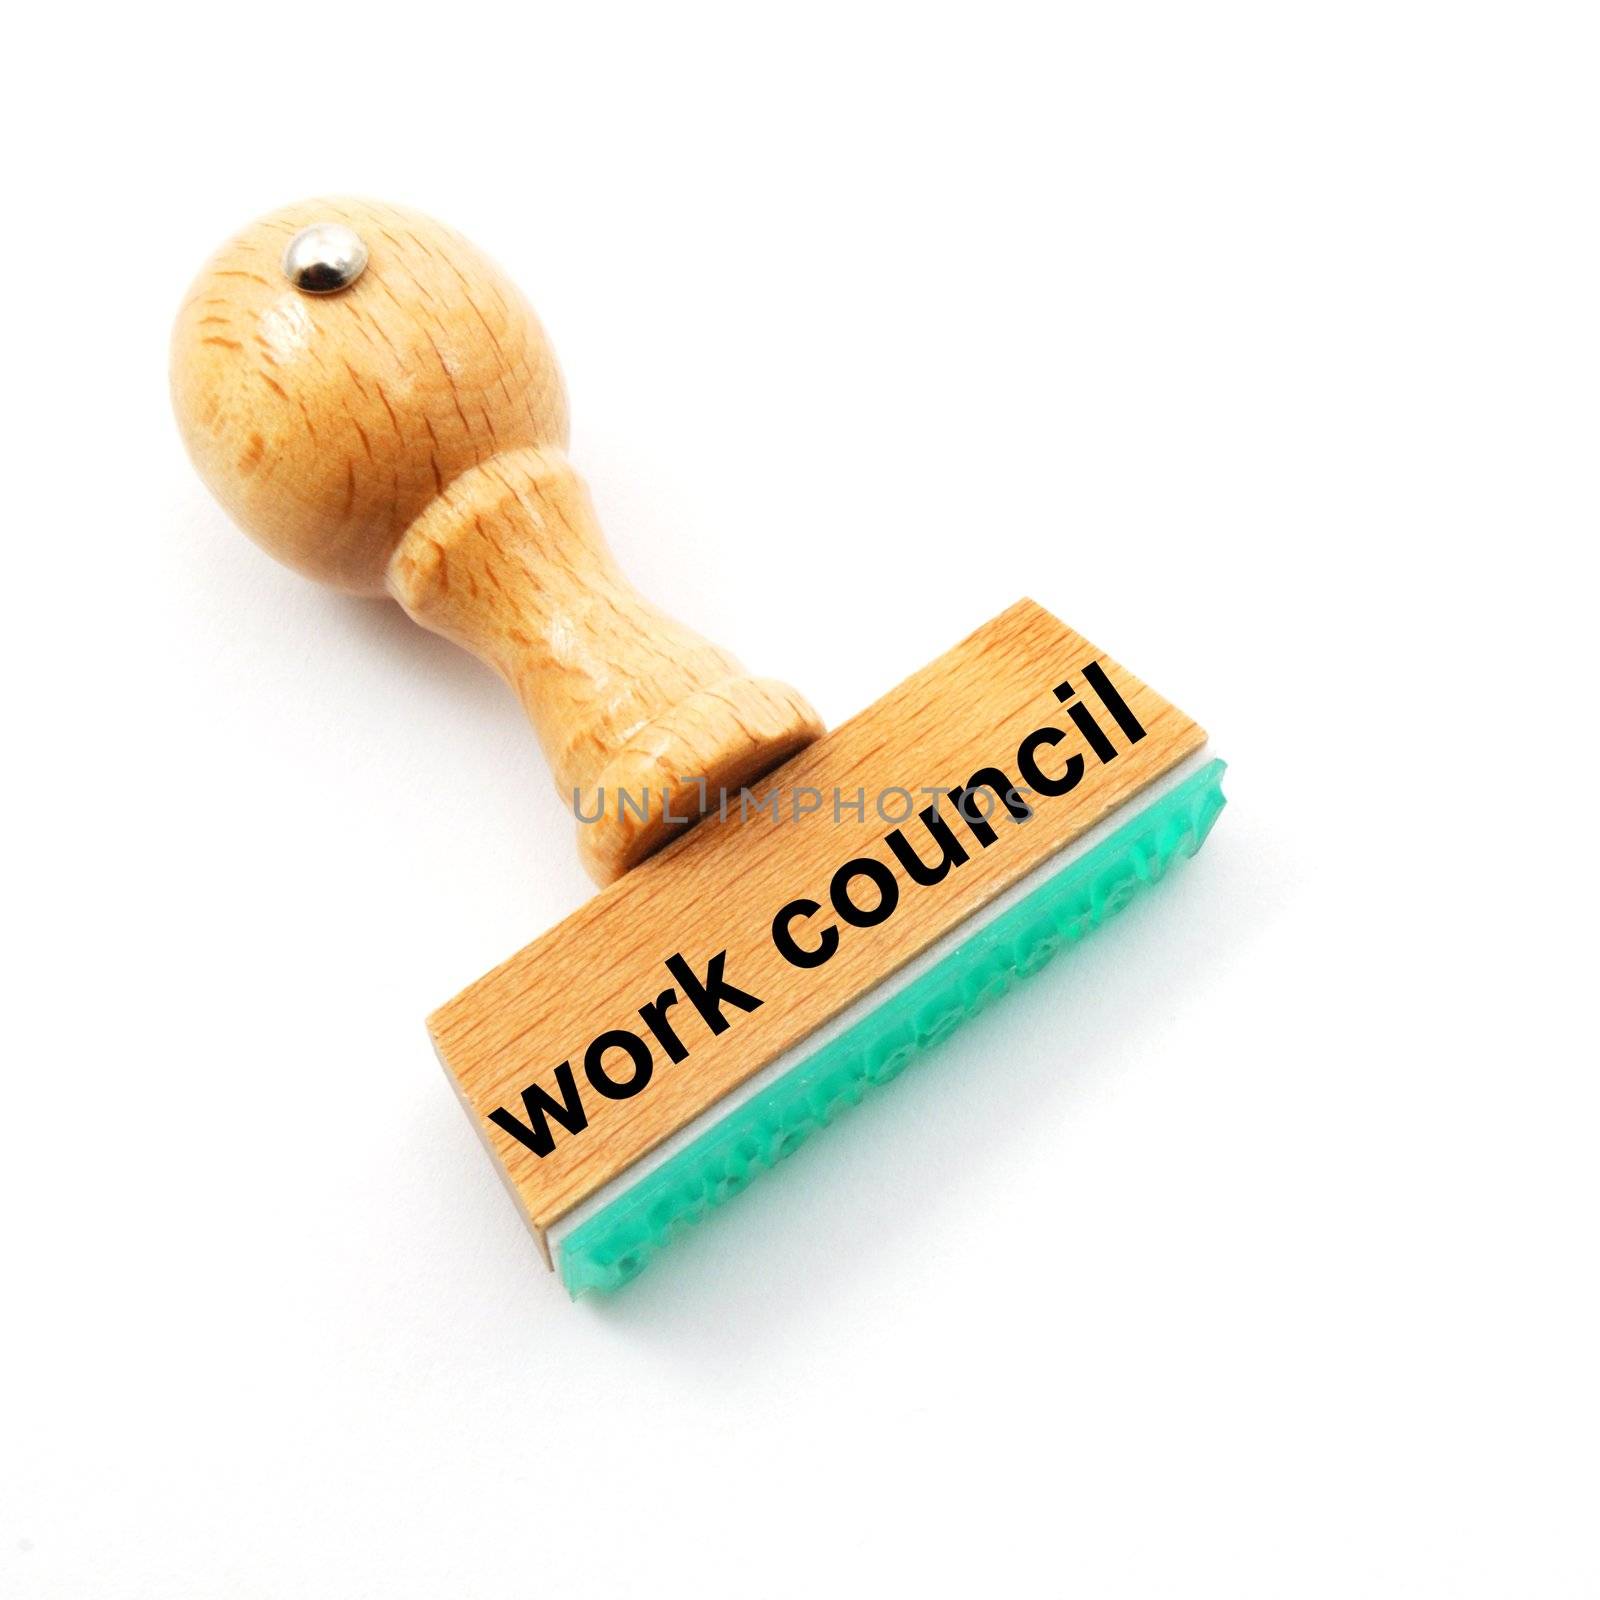 work council stamp in office ur bureau showing worker union concept